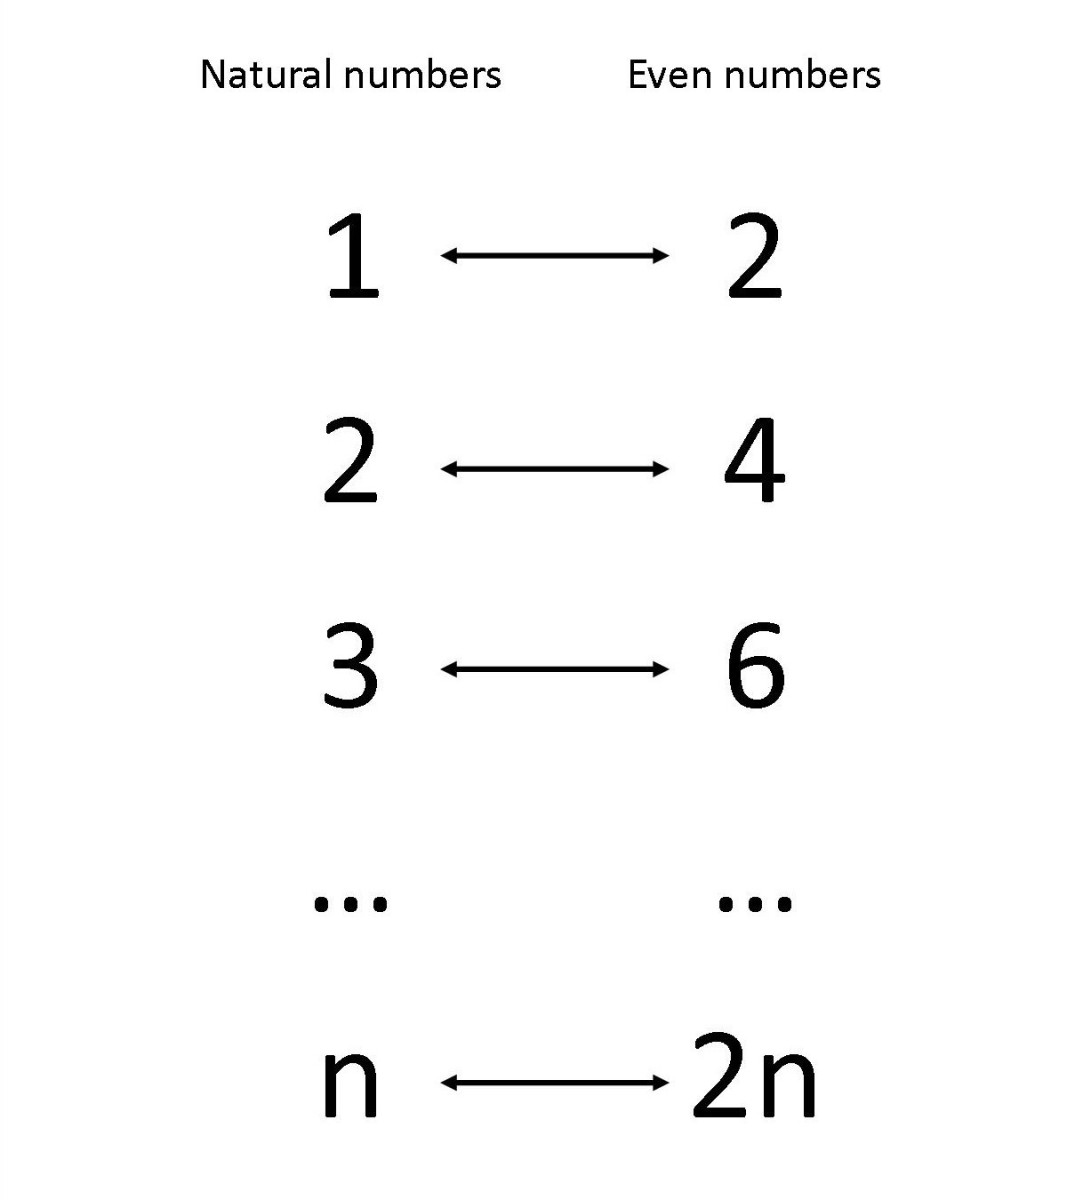 The bijection between the natural numbers and the even numbers